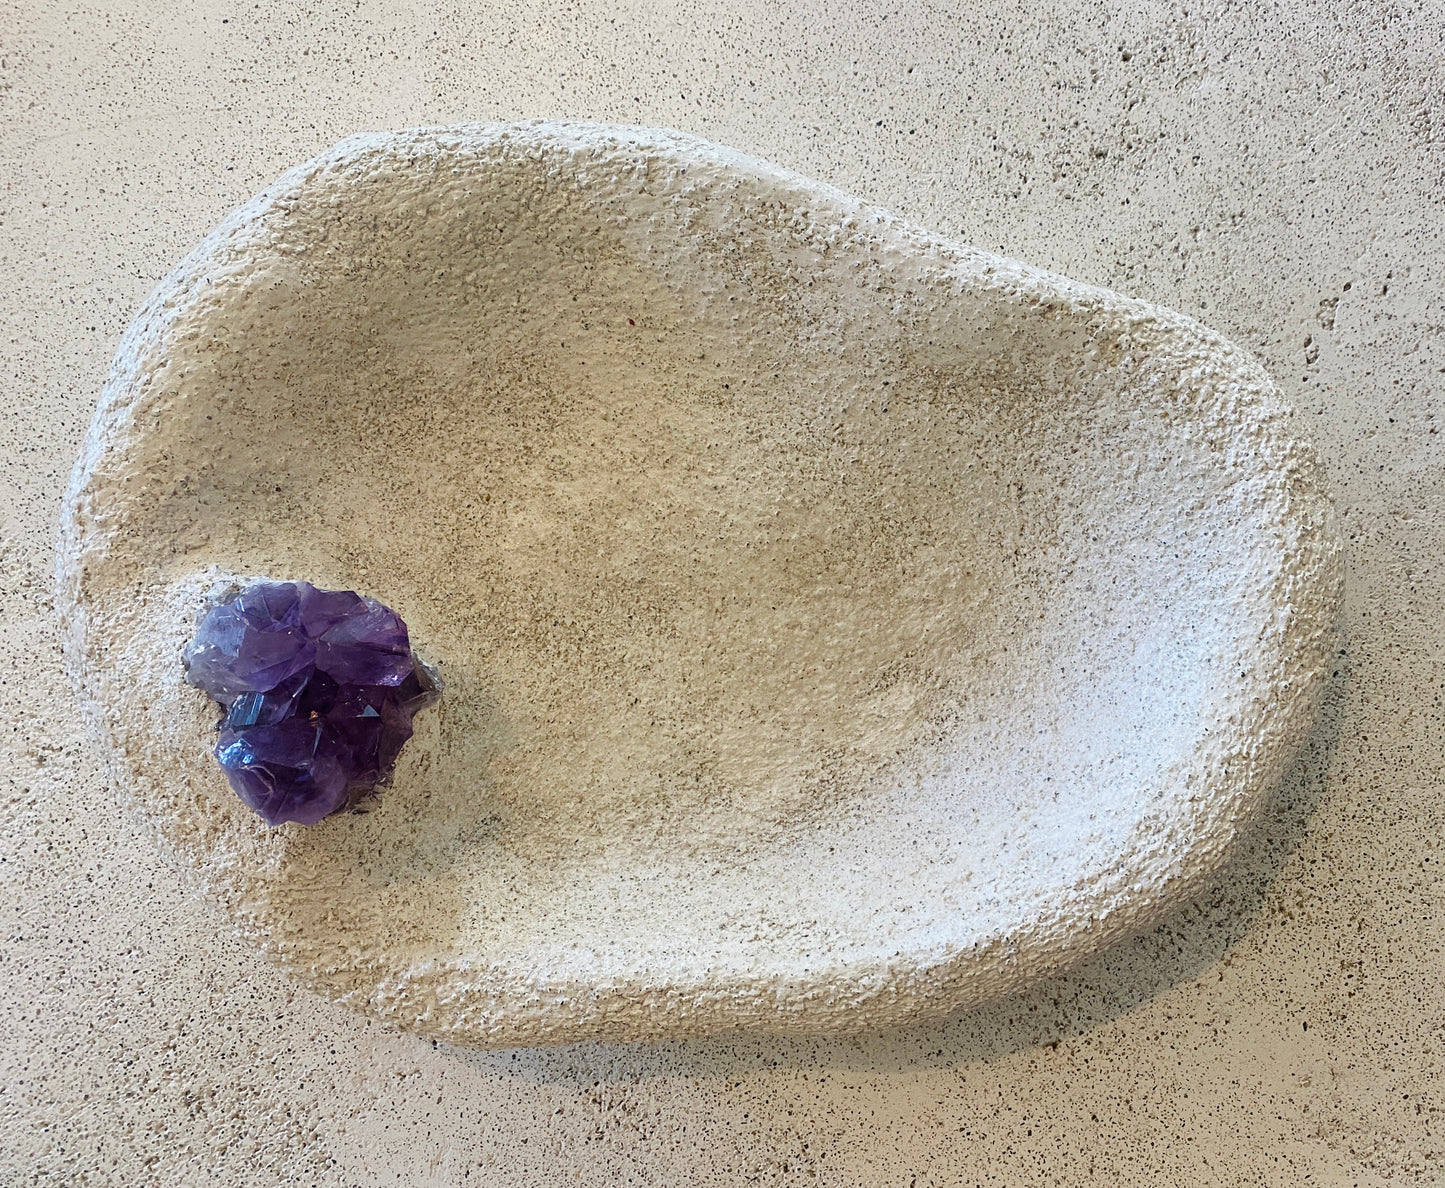 R. Bisk Sculpted Stony Vessel with Amethyst Druzy